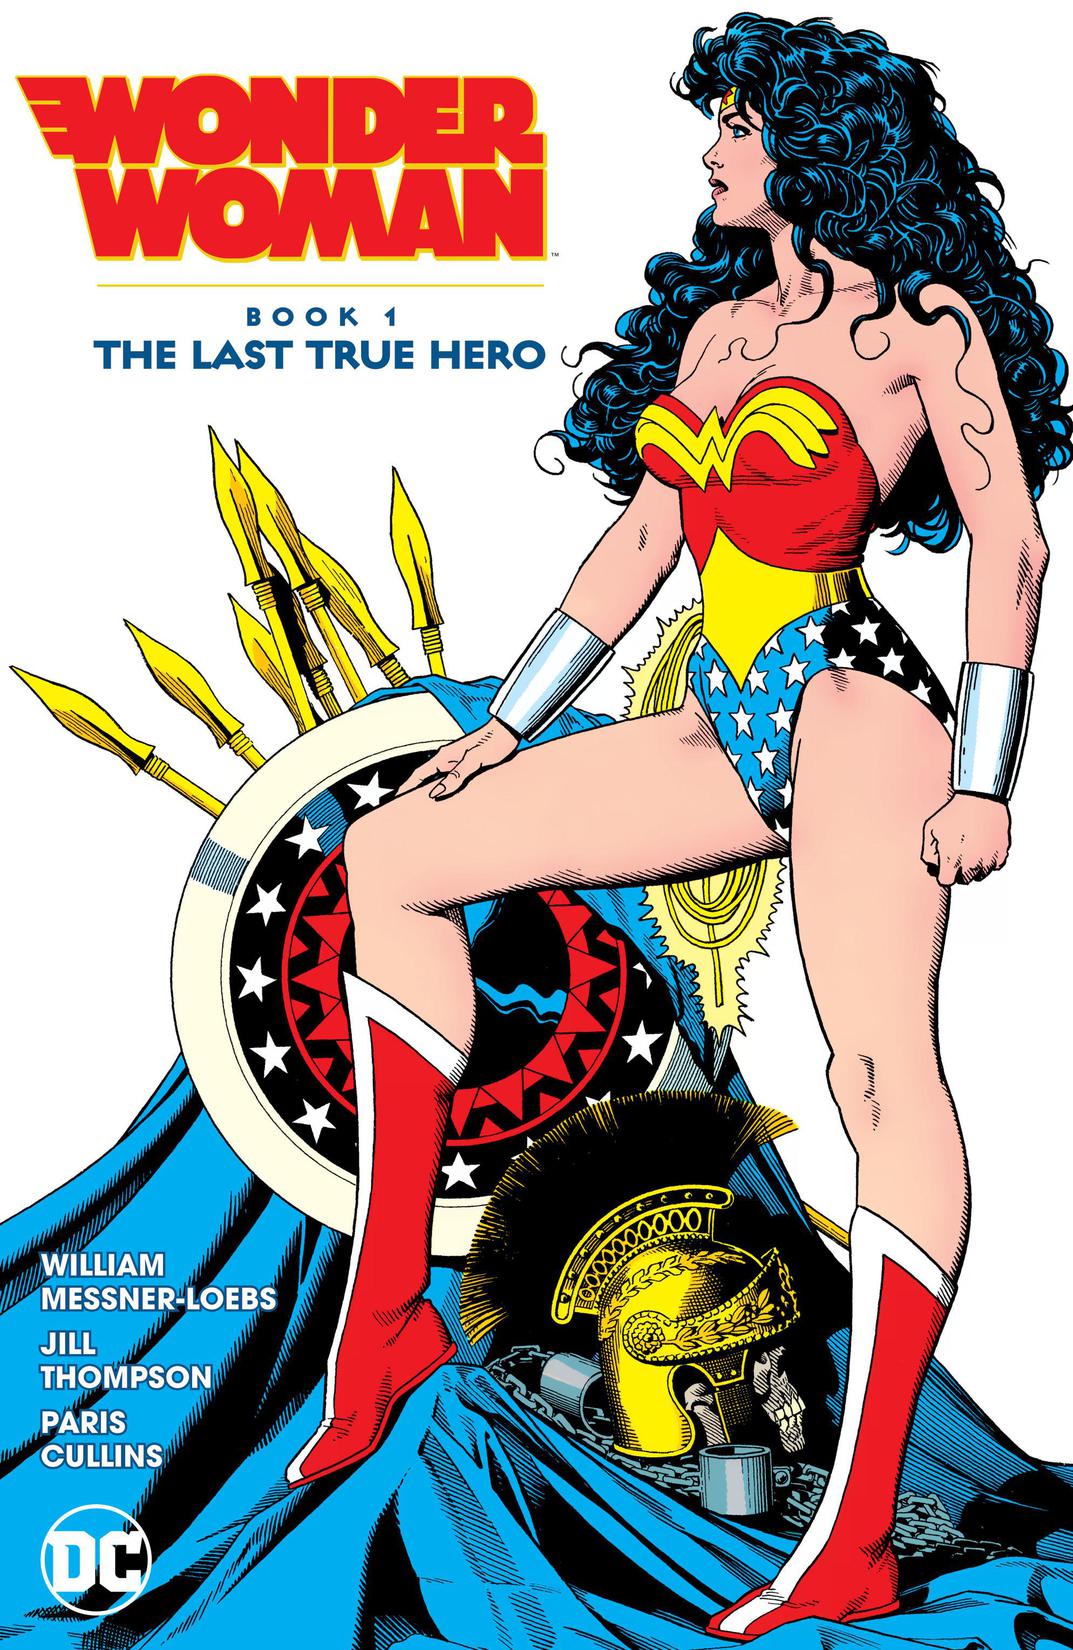 Wonder Woman Book 1: The Last True Hero preview images